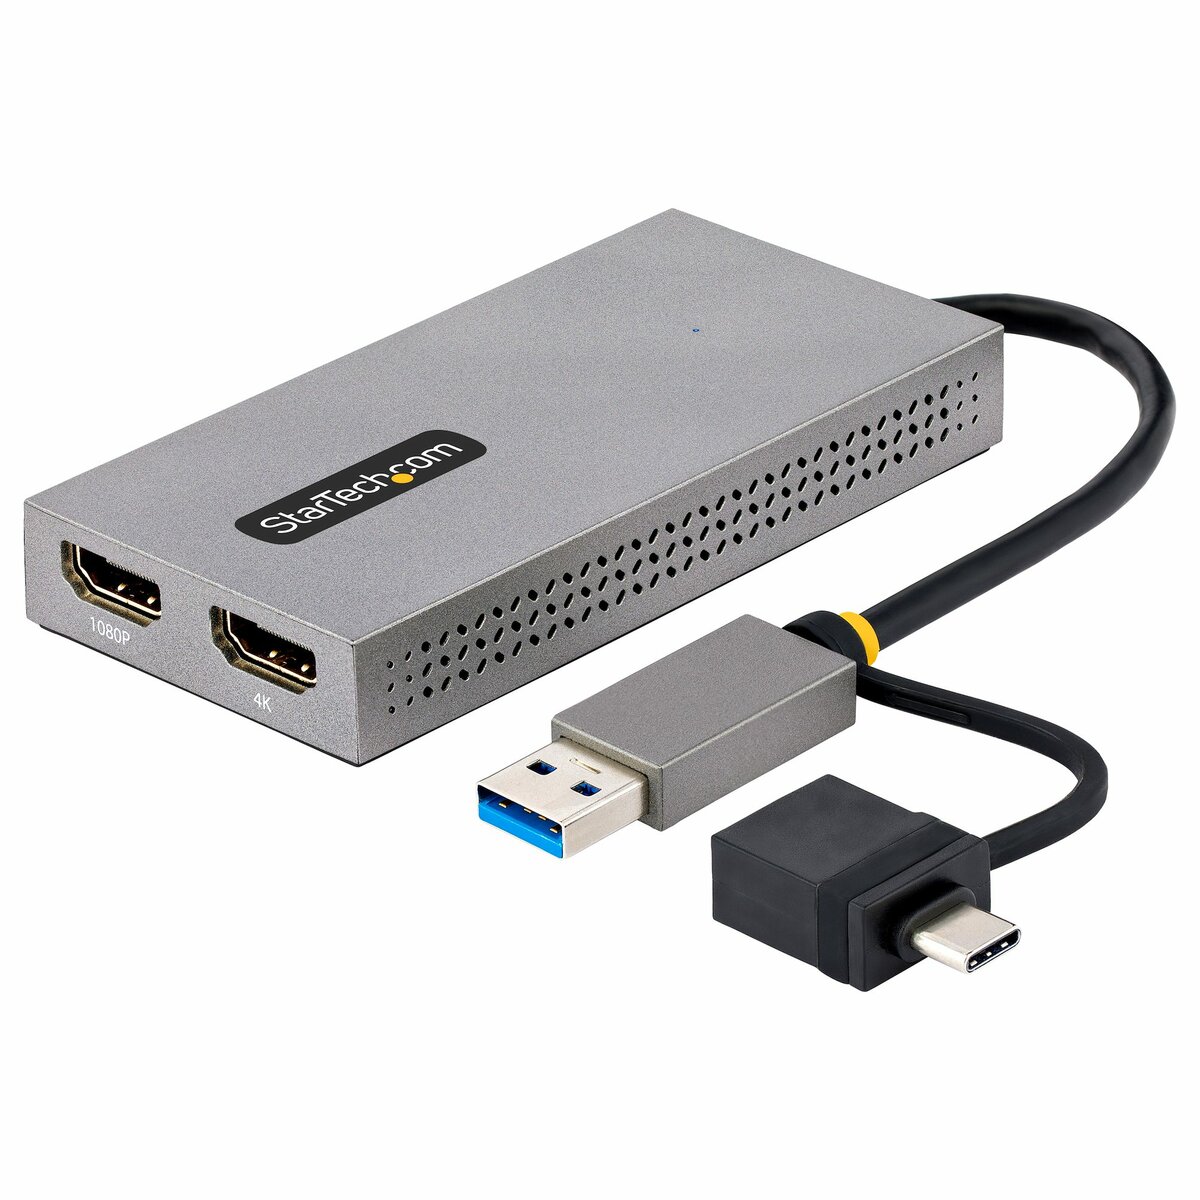 StarTech.com USB to Dual HDMI Adapter, USB A/C to 2x HDMI Monitors (1x 4K  30Hz, 1x 1080p), Integrated USB-A to C Dongle, 4in/11cm Cable, Windows &  macOS - USB 3.0 to HDMI